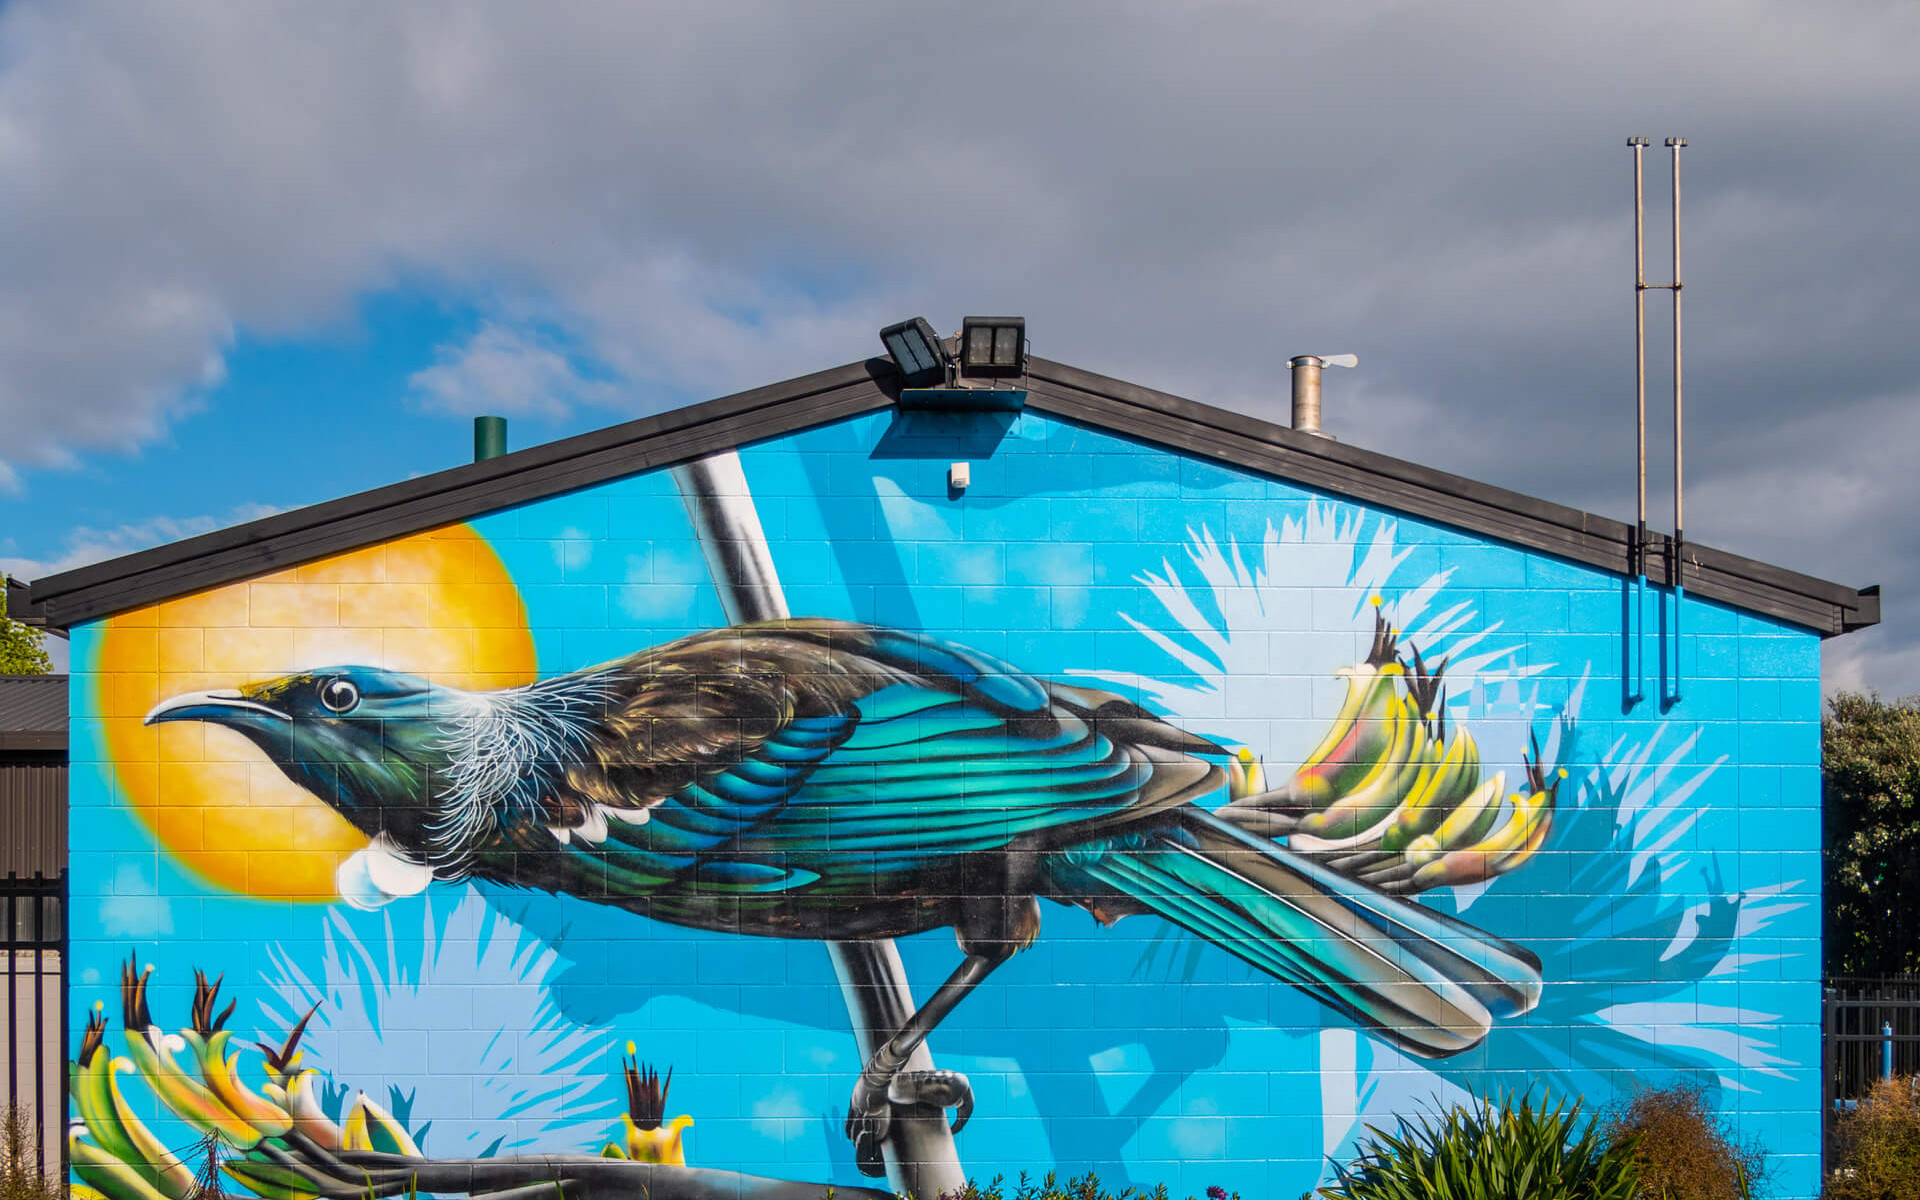 Tui mural by Charles Janine Williams in Neale Park